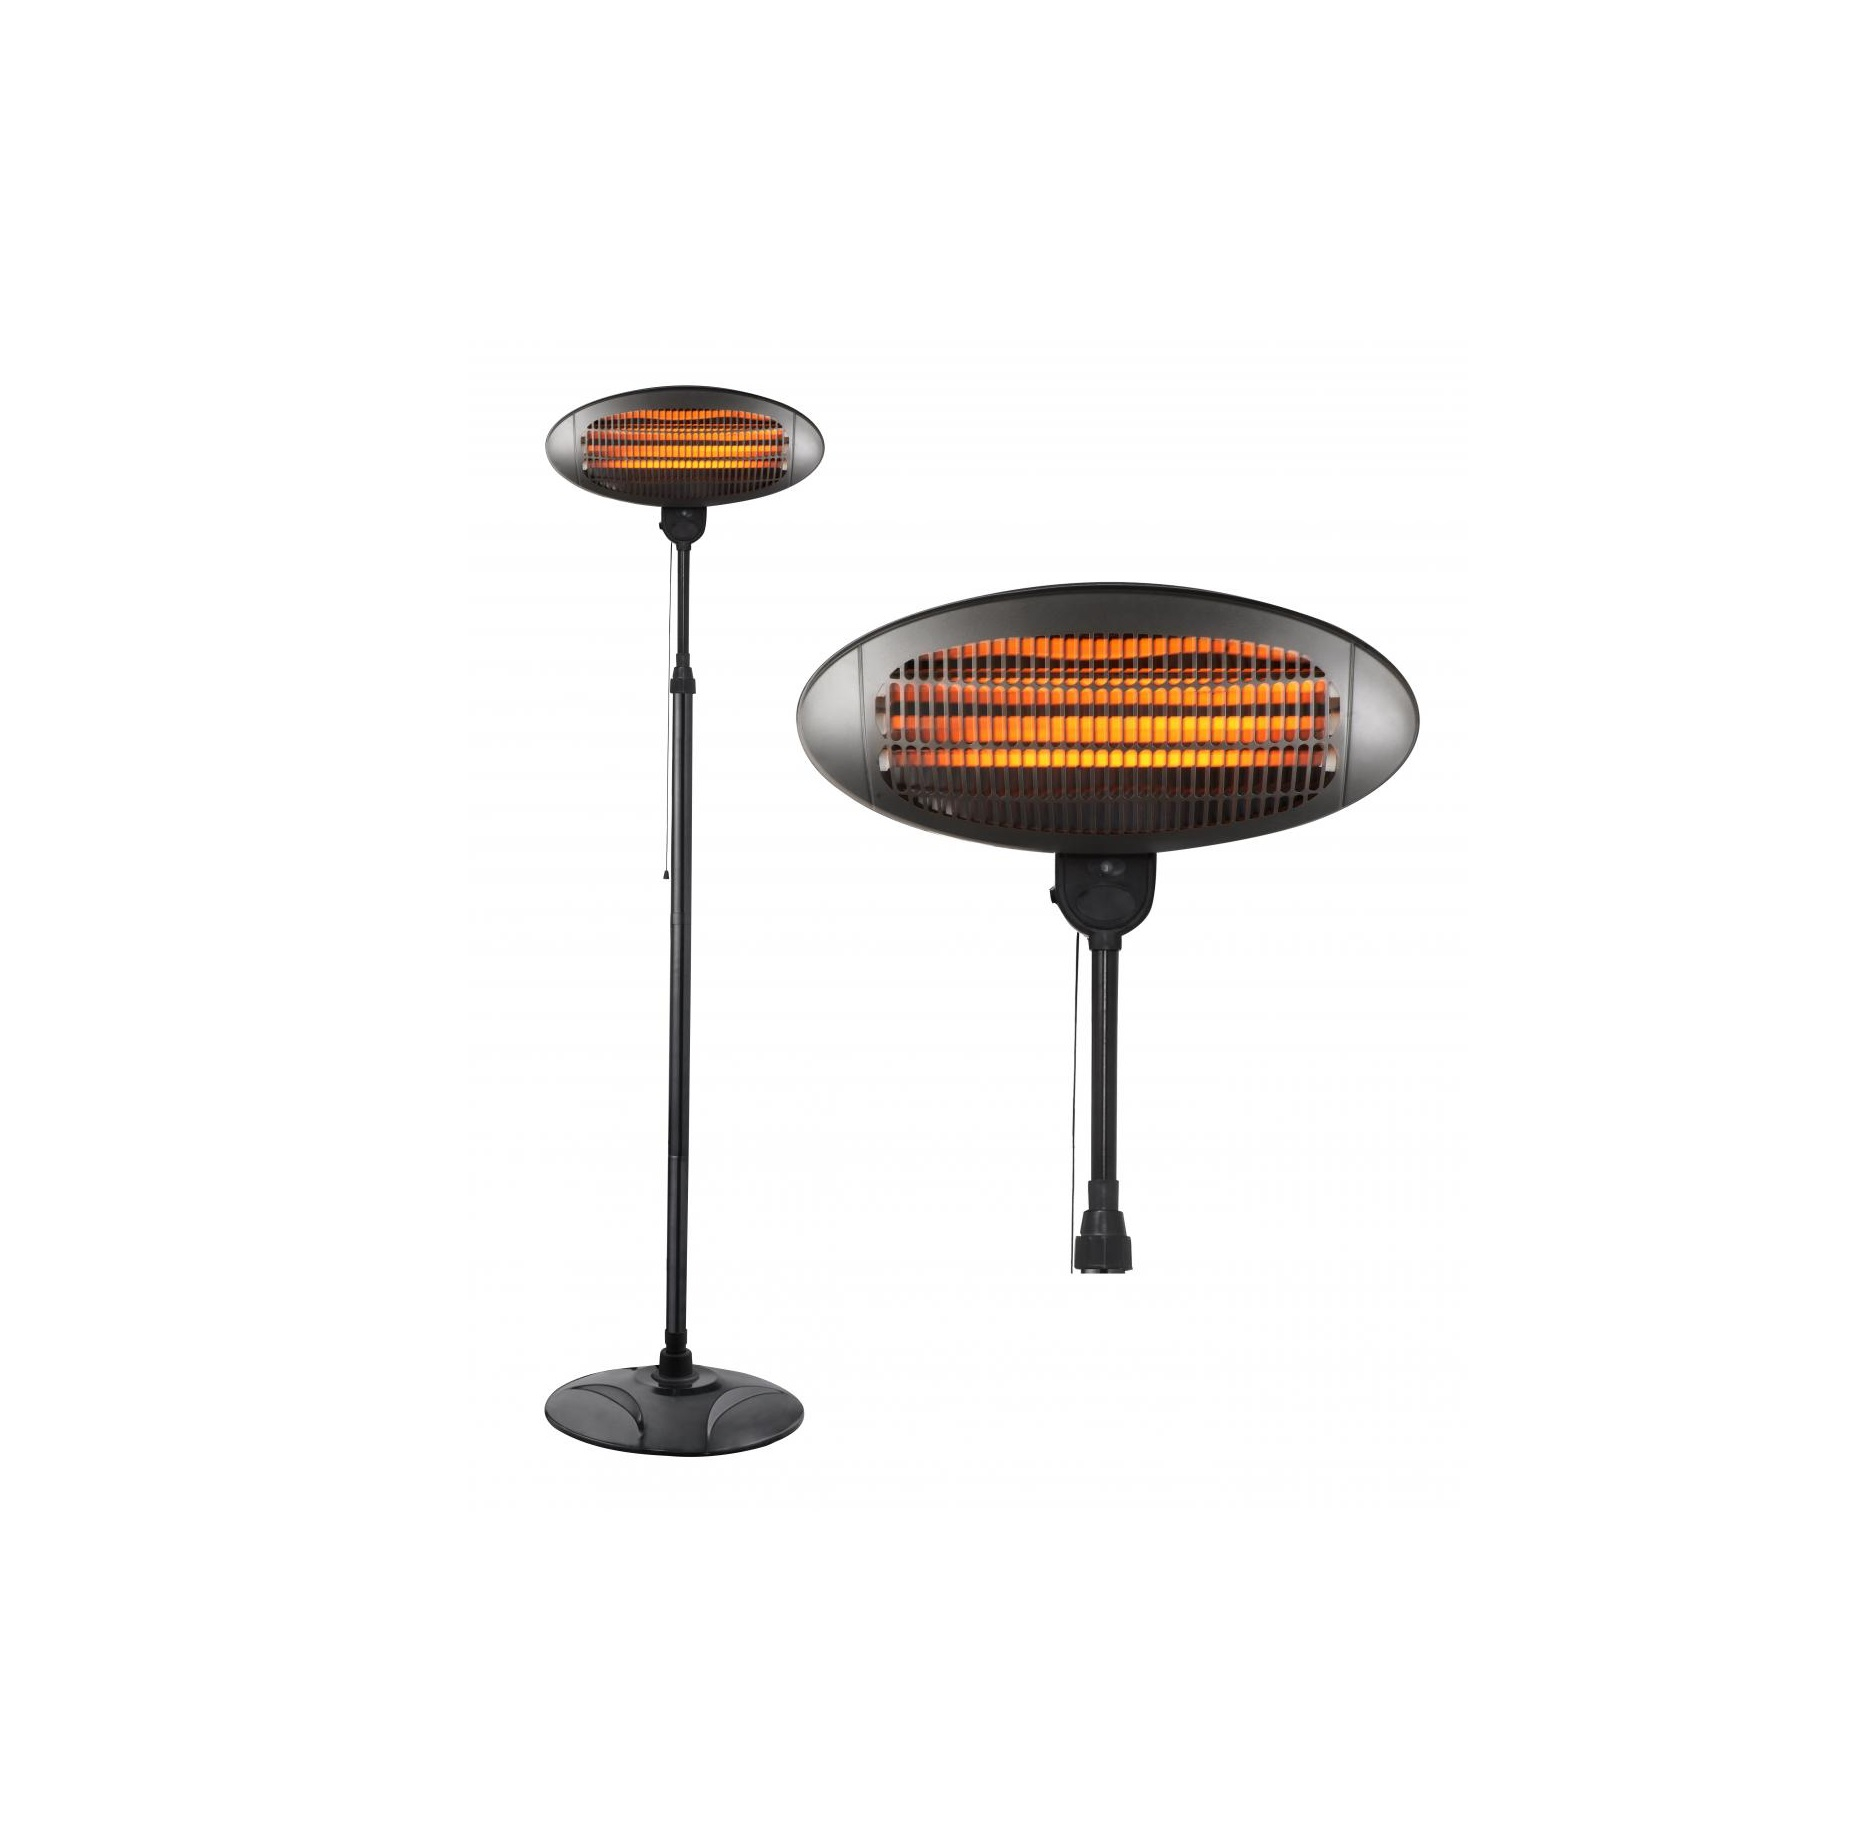 Laptronix 2kw Electric Patio Heater Outdoor Free Standing Garden Infrared Quartz Laptronix throughout proportions 1868 X 1844